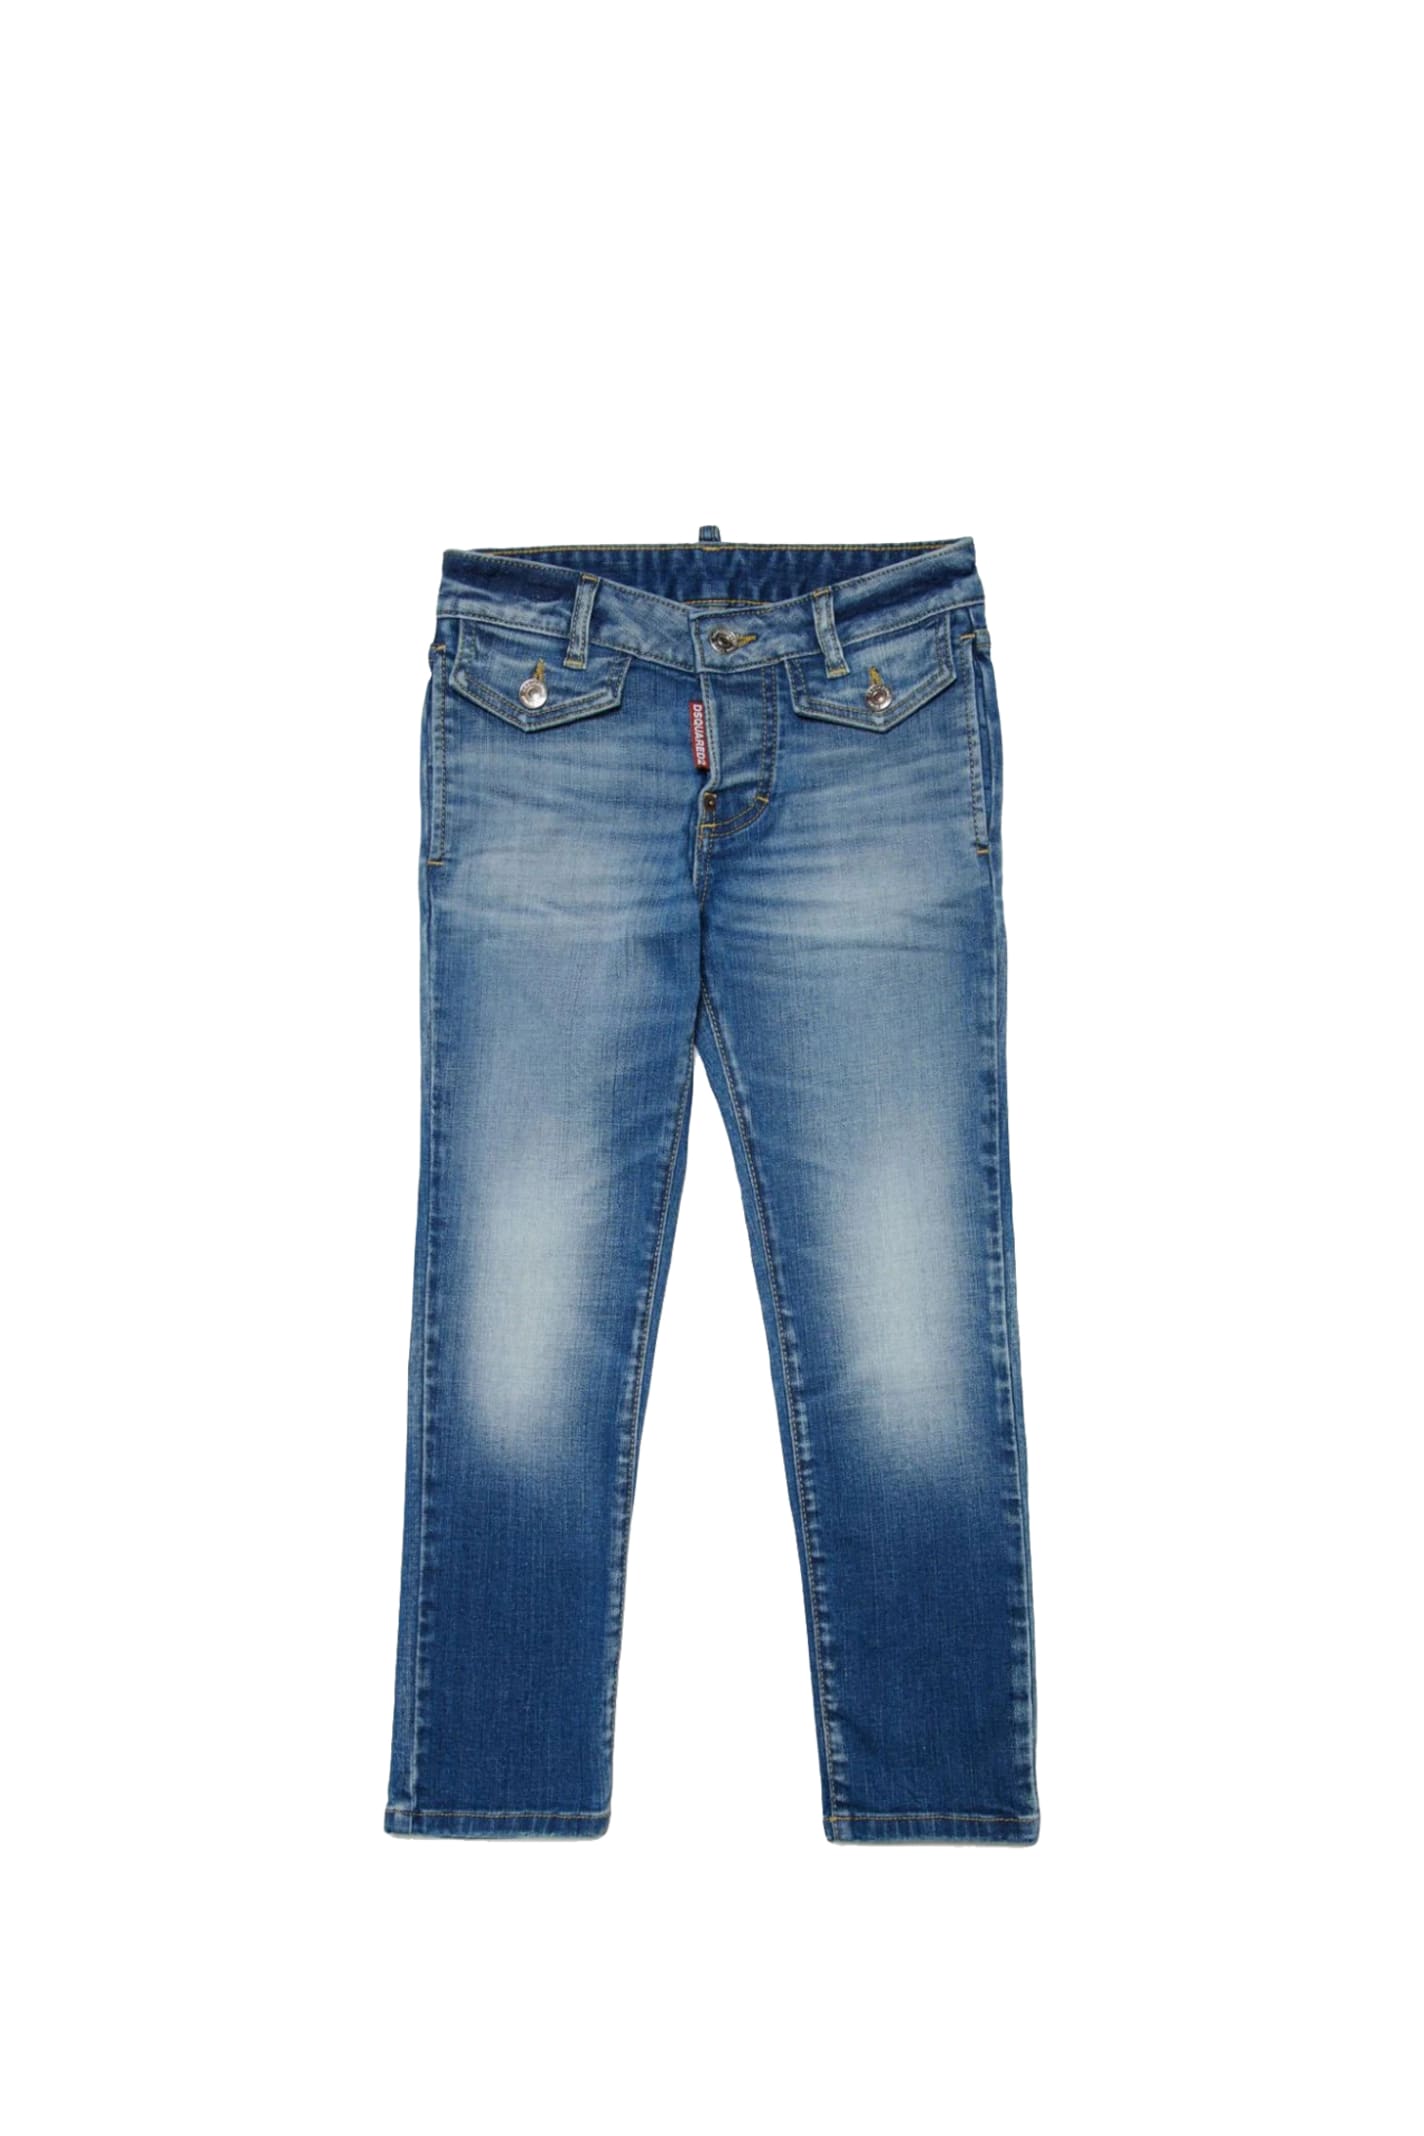 Shop Dsquared2 Slim Jeans With Embroidery In Blue